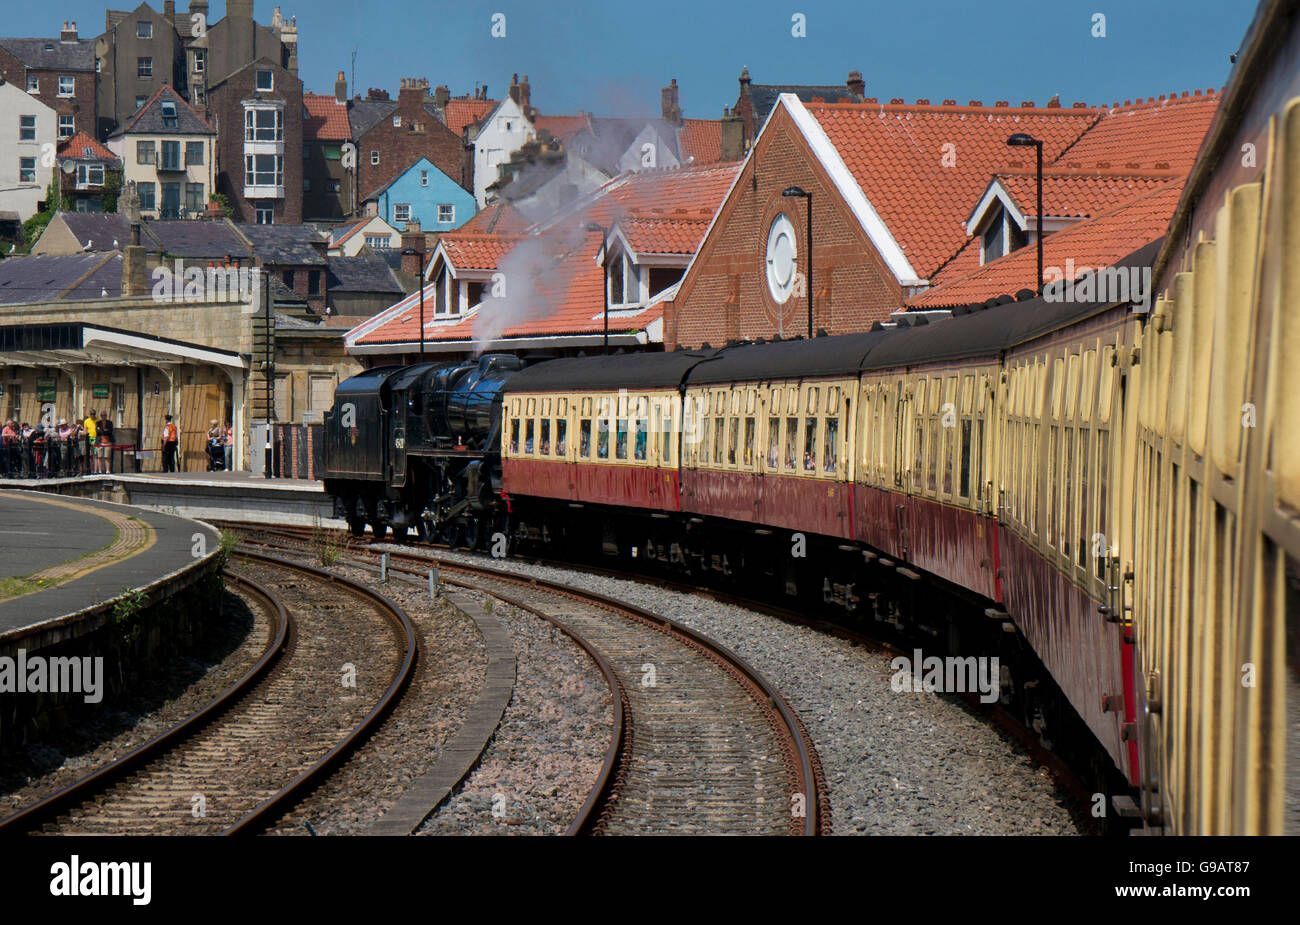 Dampf-Zug der North Yorkshire Moors Railway station in Whitby Stockfoto